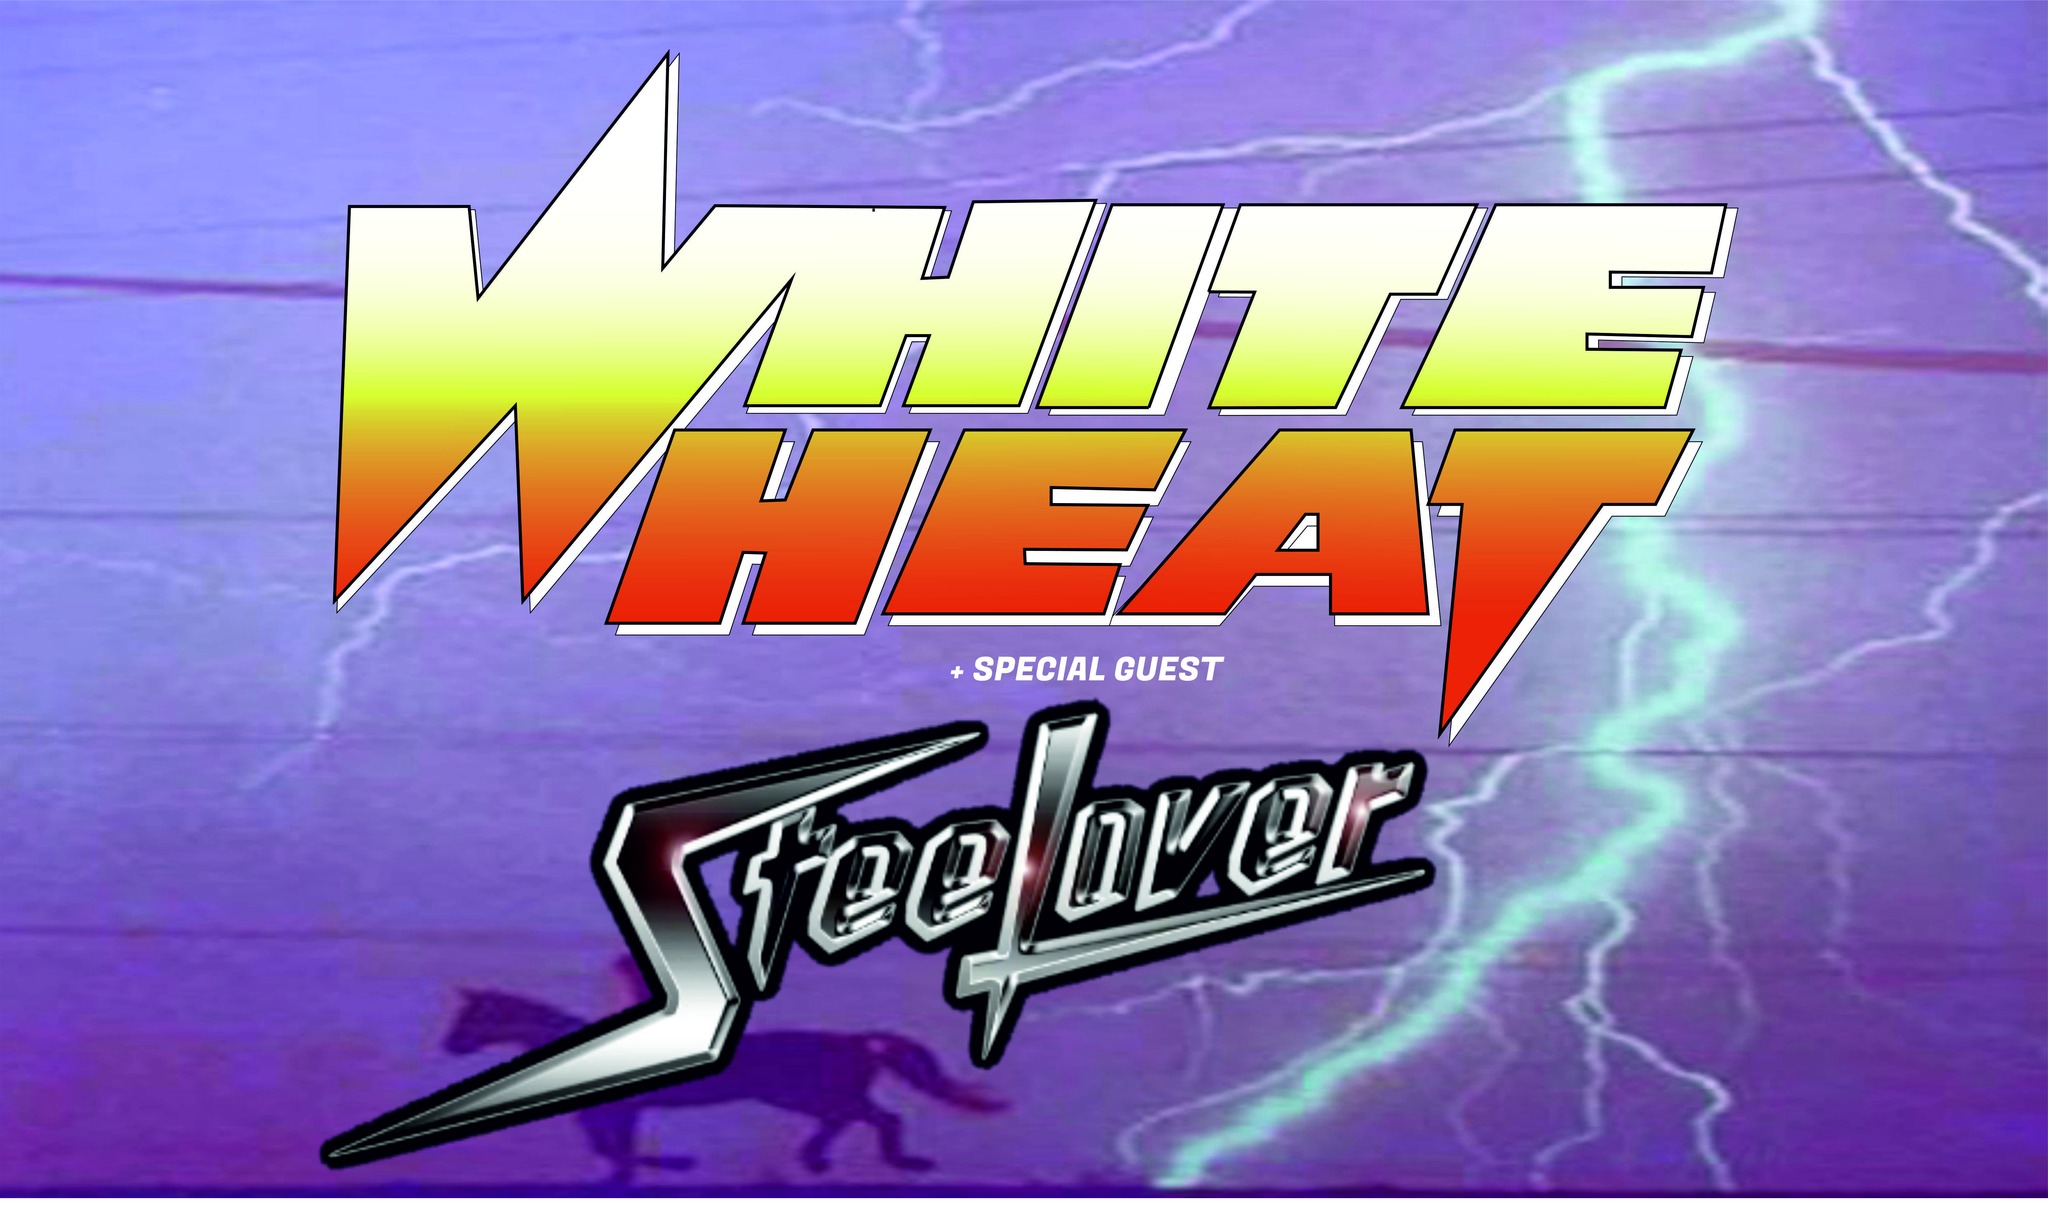 WHITE HEAT + special guest STEELOVER